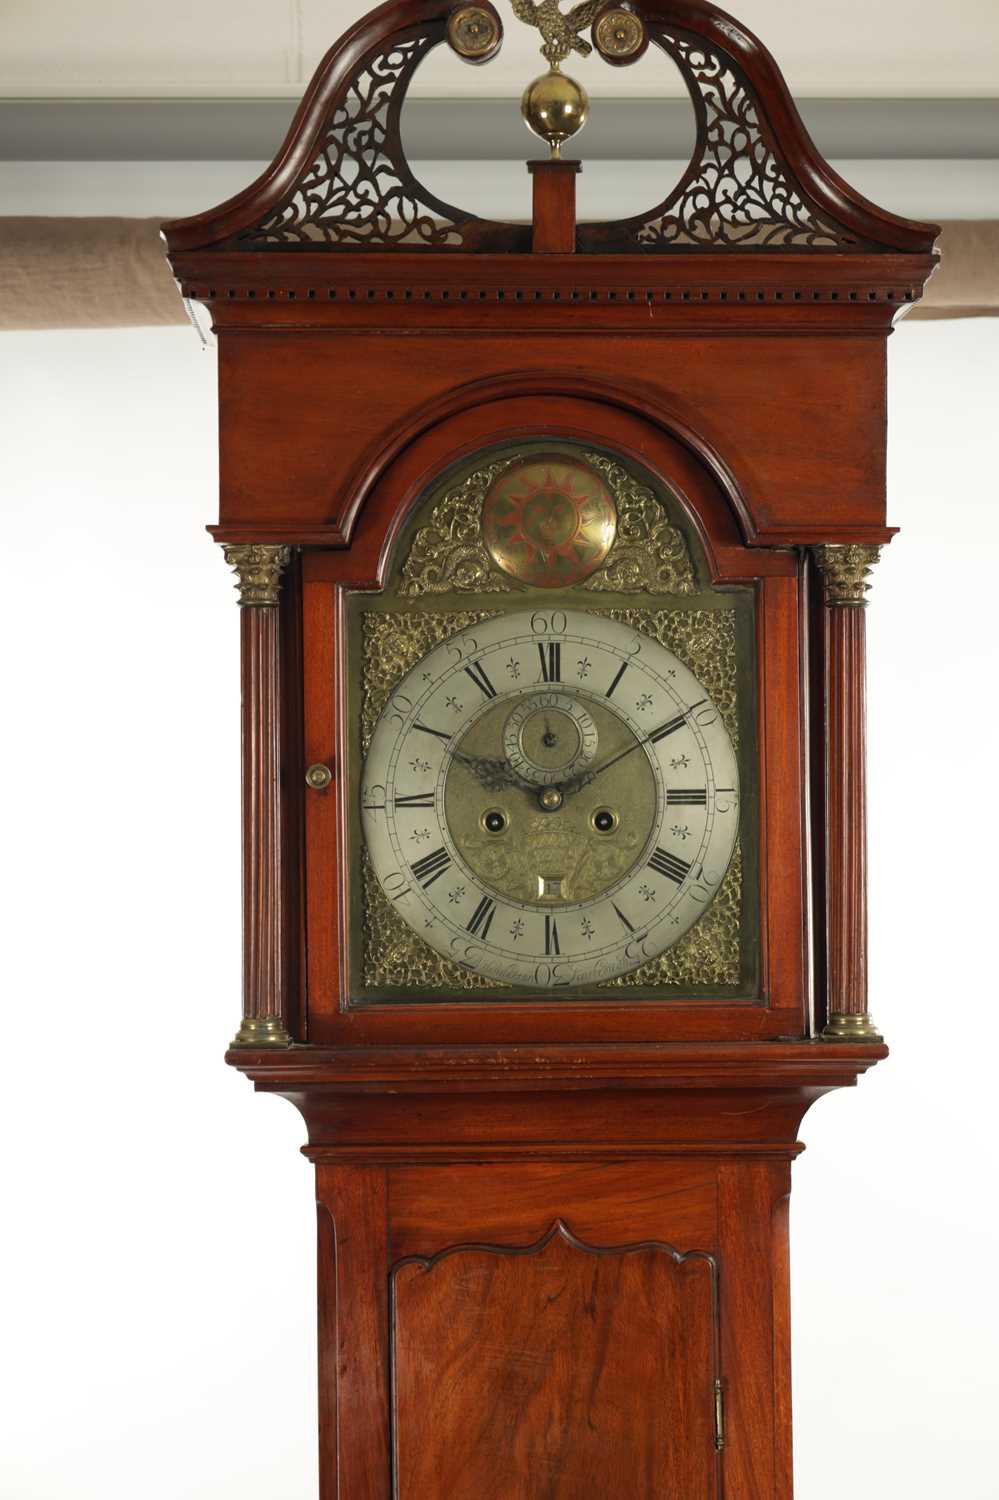 R. HENDERSON, SCARBROUGH. A MID 18TH CENTURY FIGURED MAHOGANY LONGCASE CLOCK - Image 2 of 8